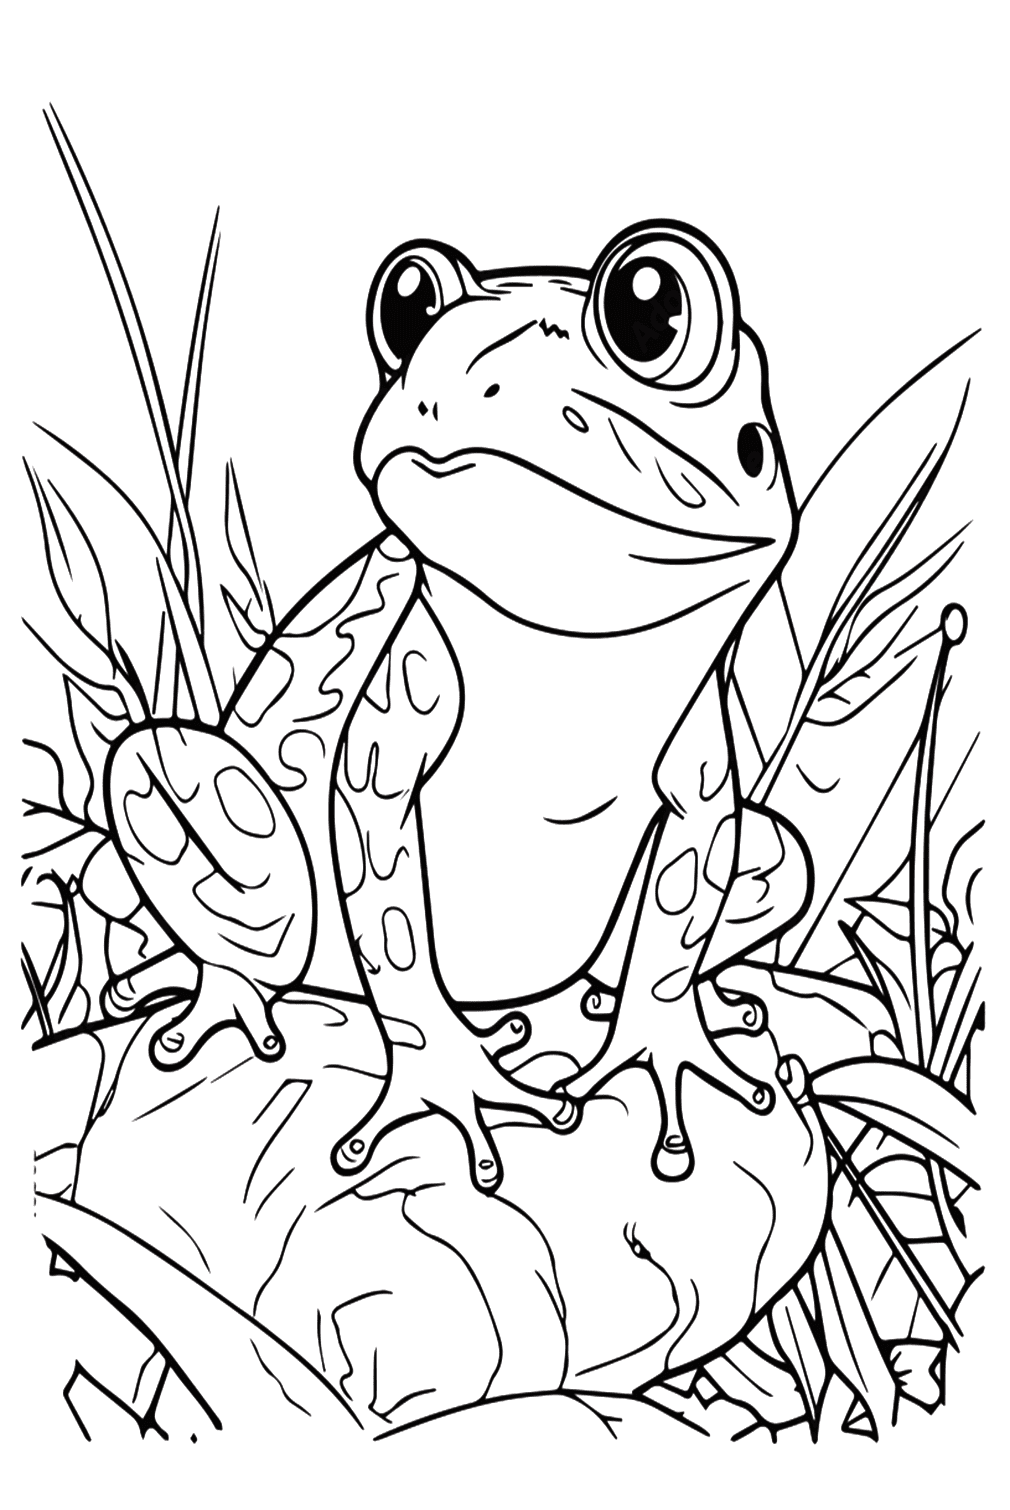 Cane Toad Picture To Color - Free Printable Coloring Pages